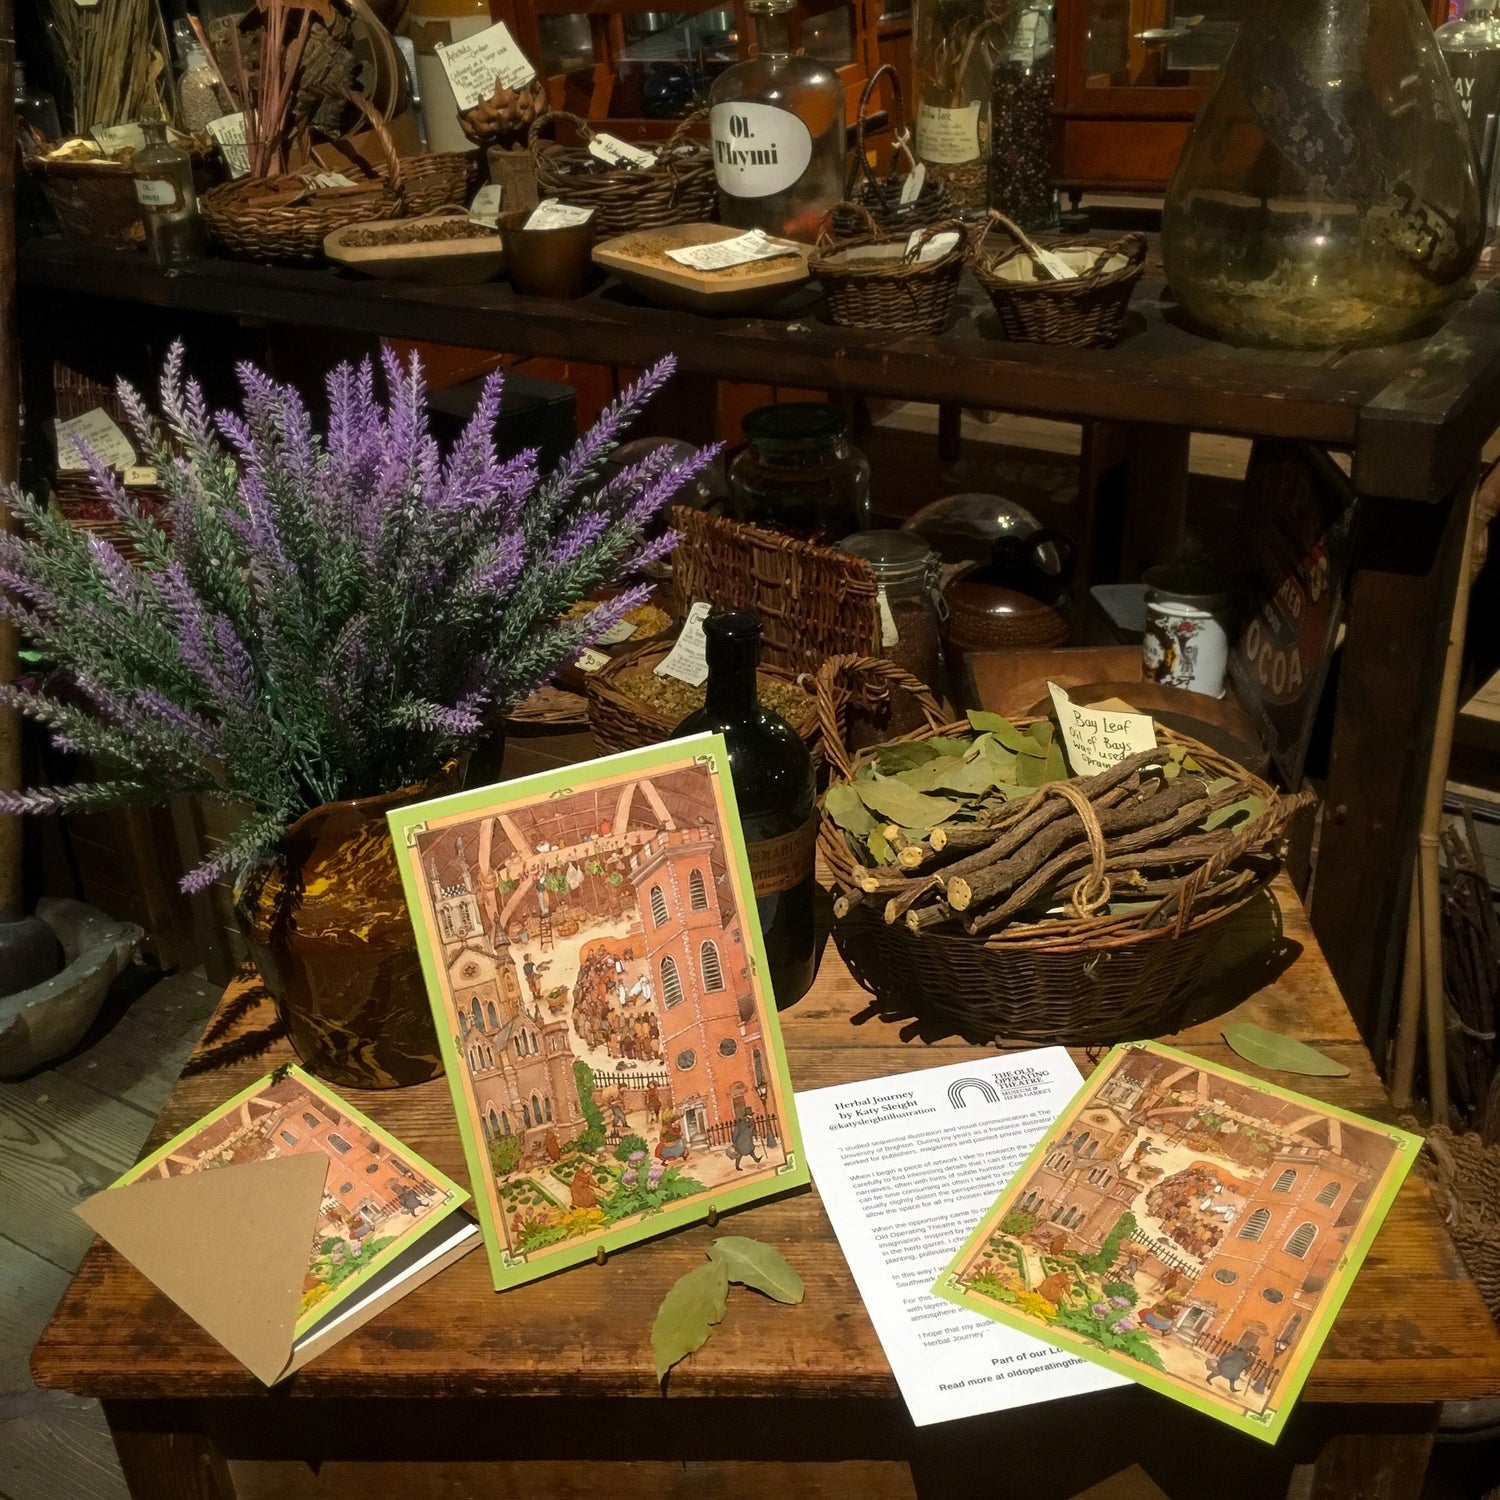 Prints and a greetings card with a design that features different historical aspects of the Old Operating Theatre, placed on a table in the herb garret